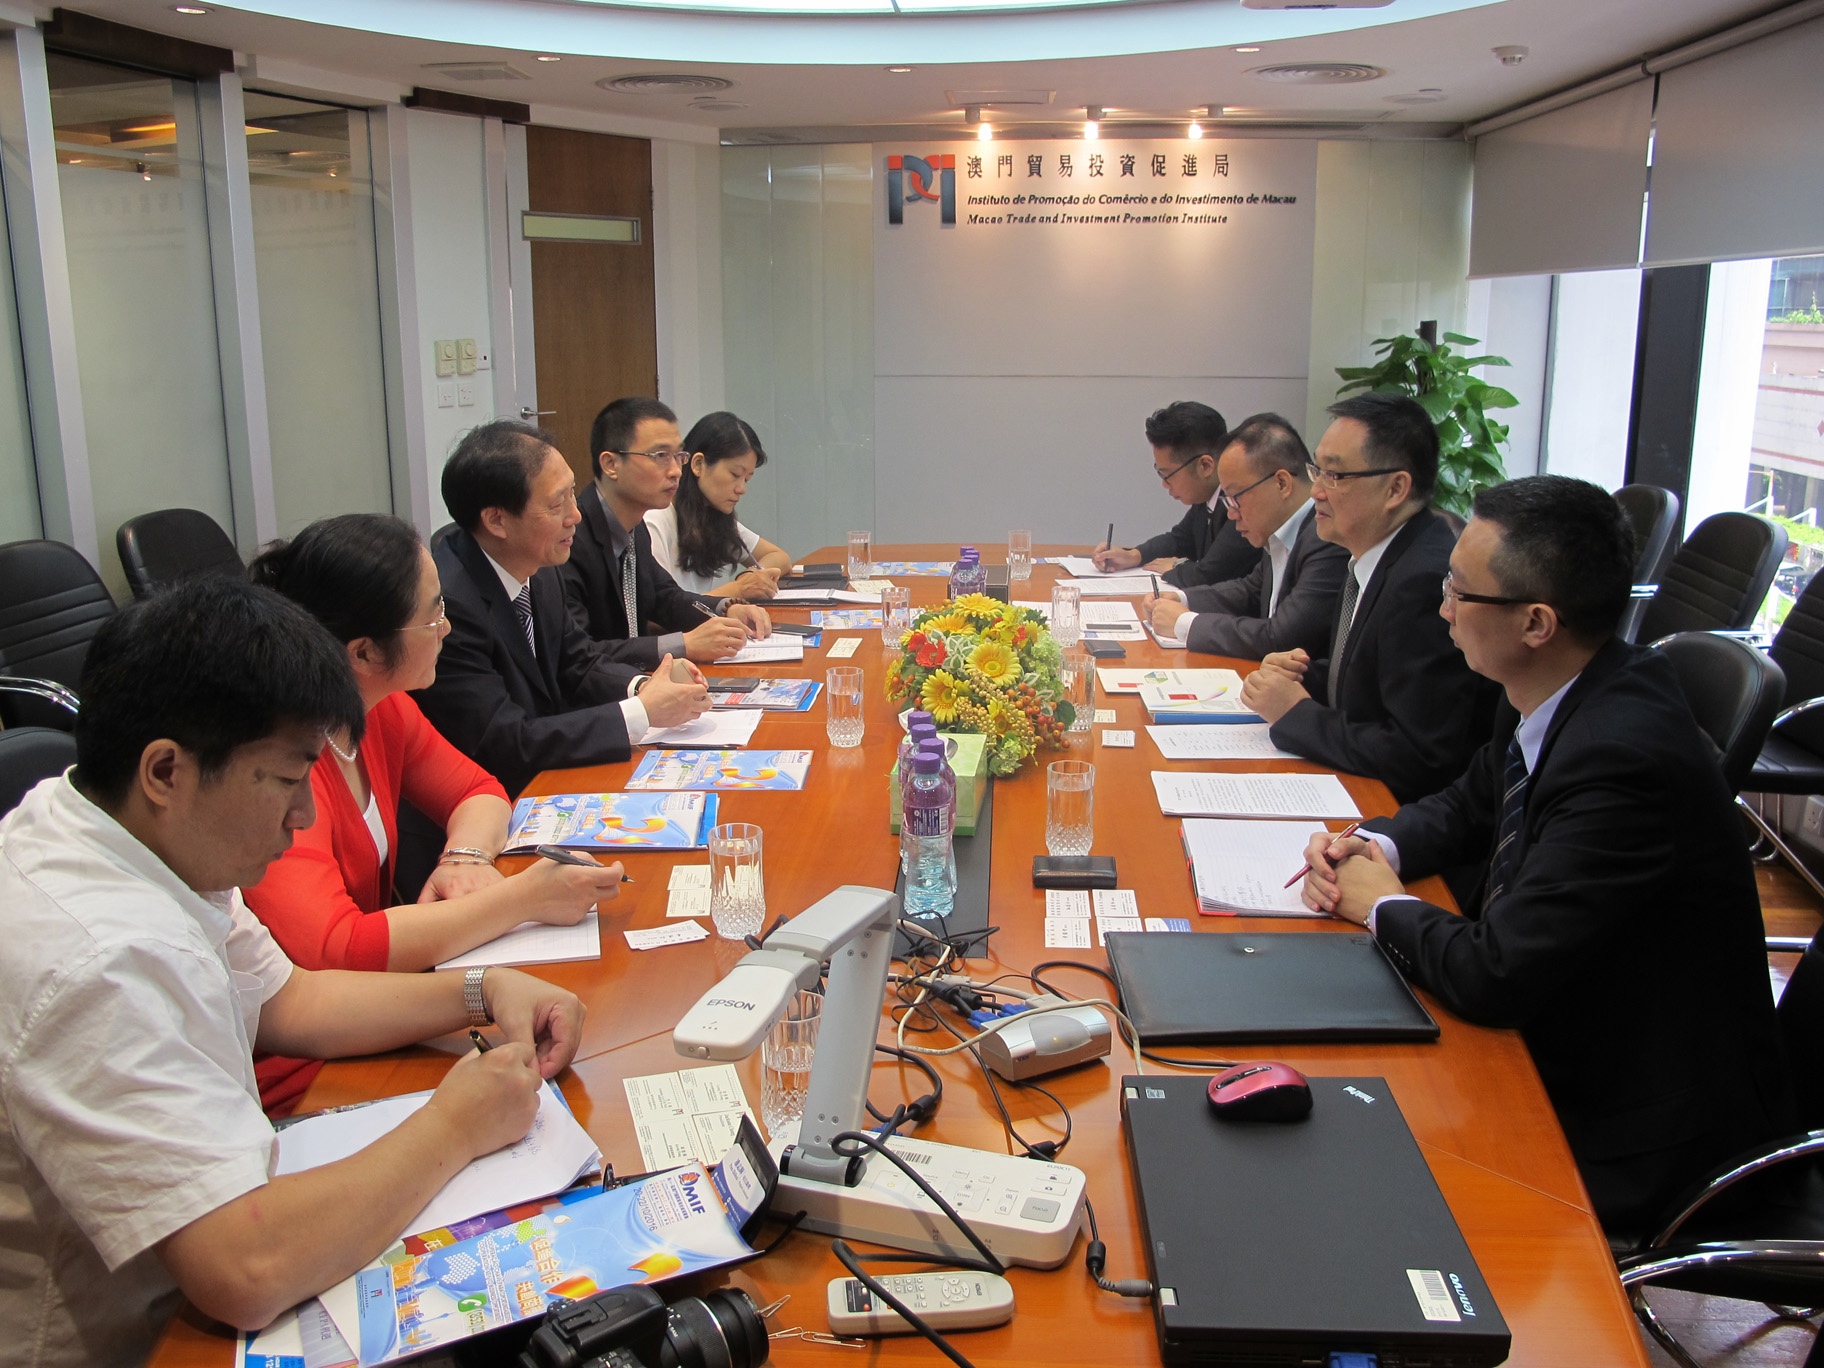 IPIM’s President Jackson Chang in a meeting with Vice General-Director of Department of Commerce of Fujian Province Huang Dezhi and the delegation<br />(7 July 2016)